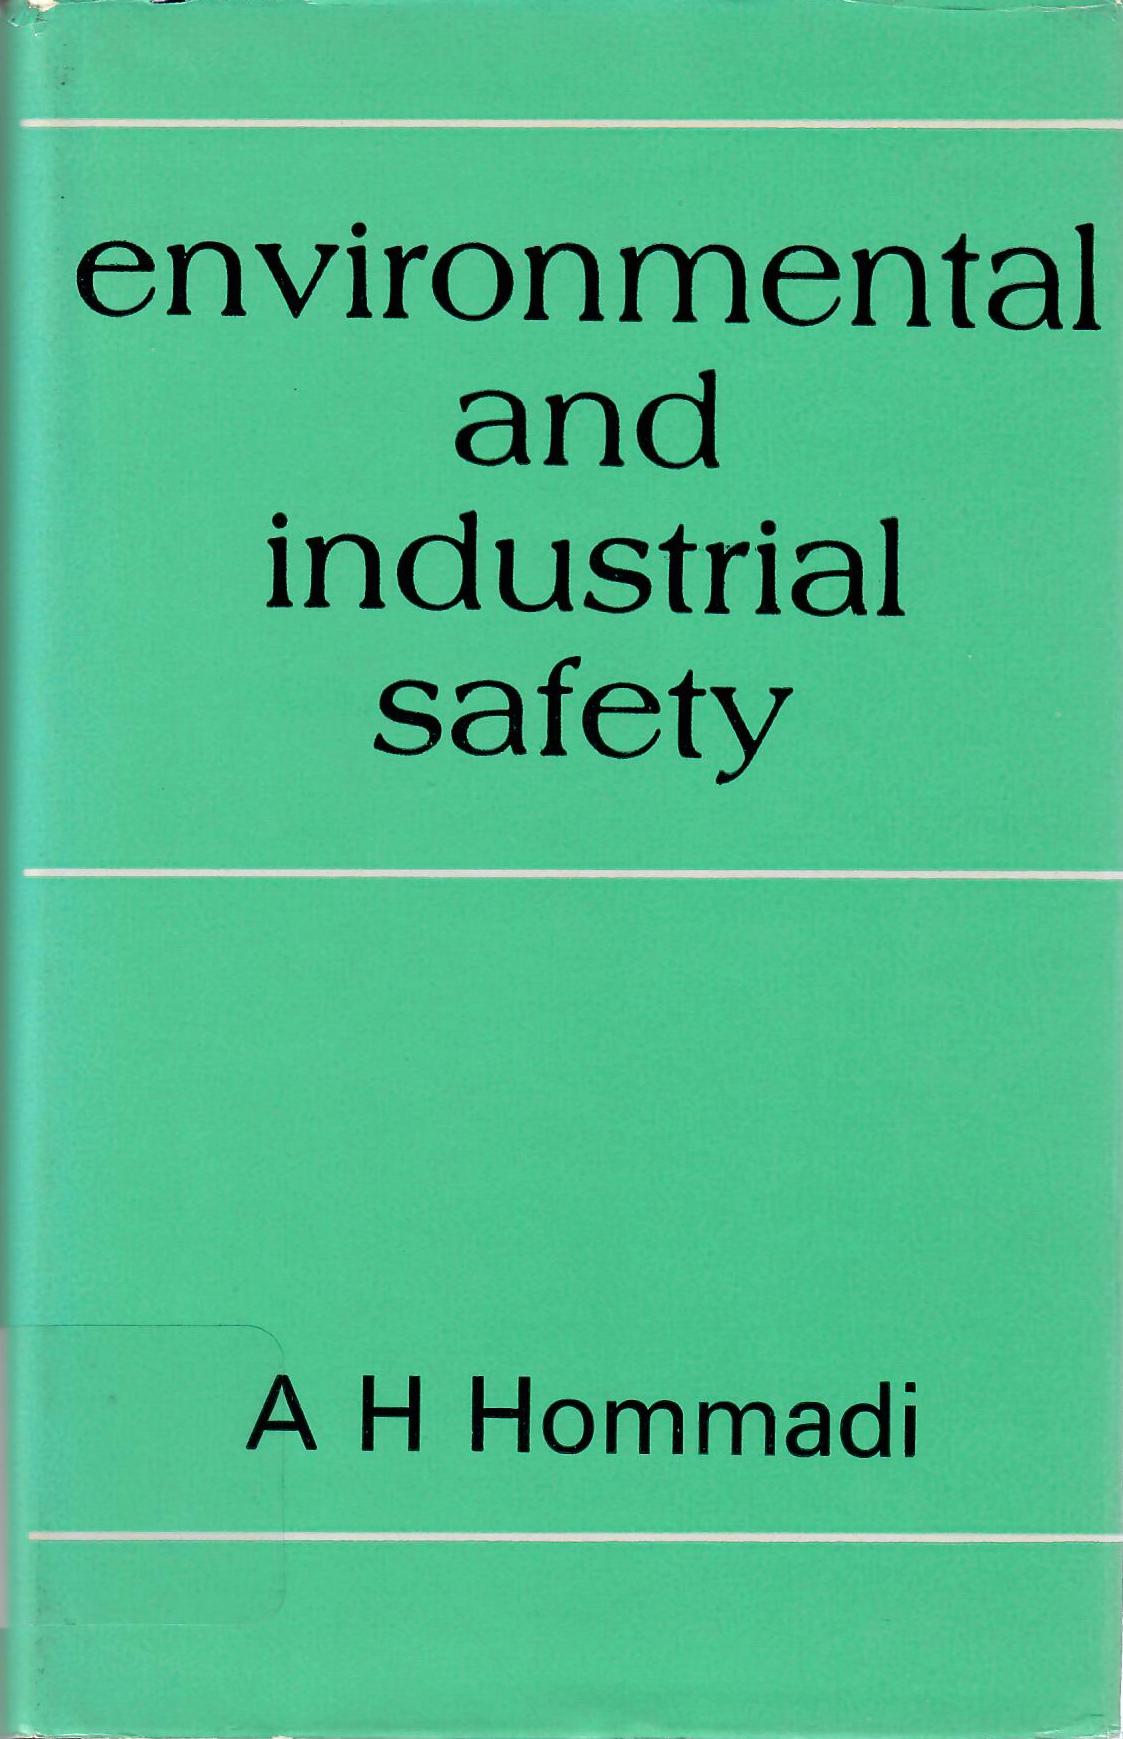 enviromental and industrial safety